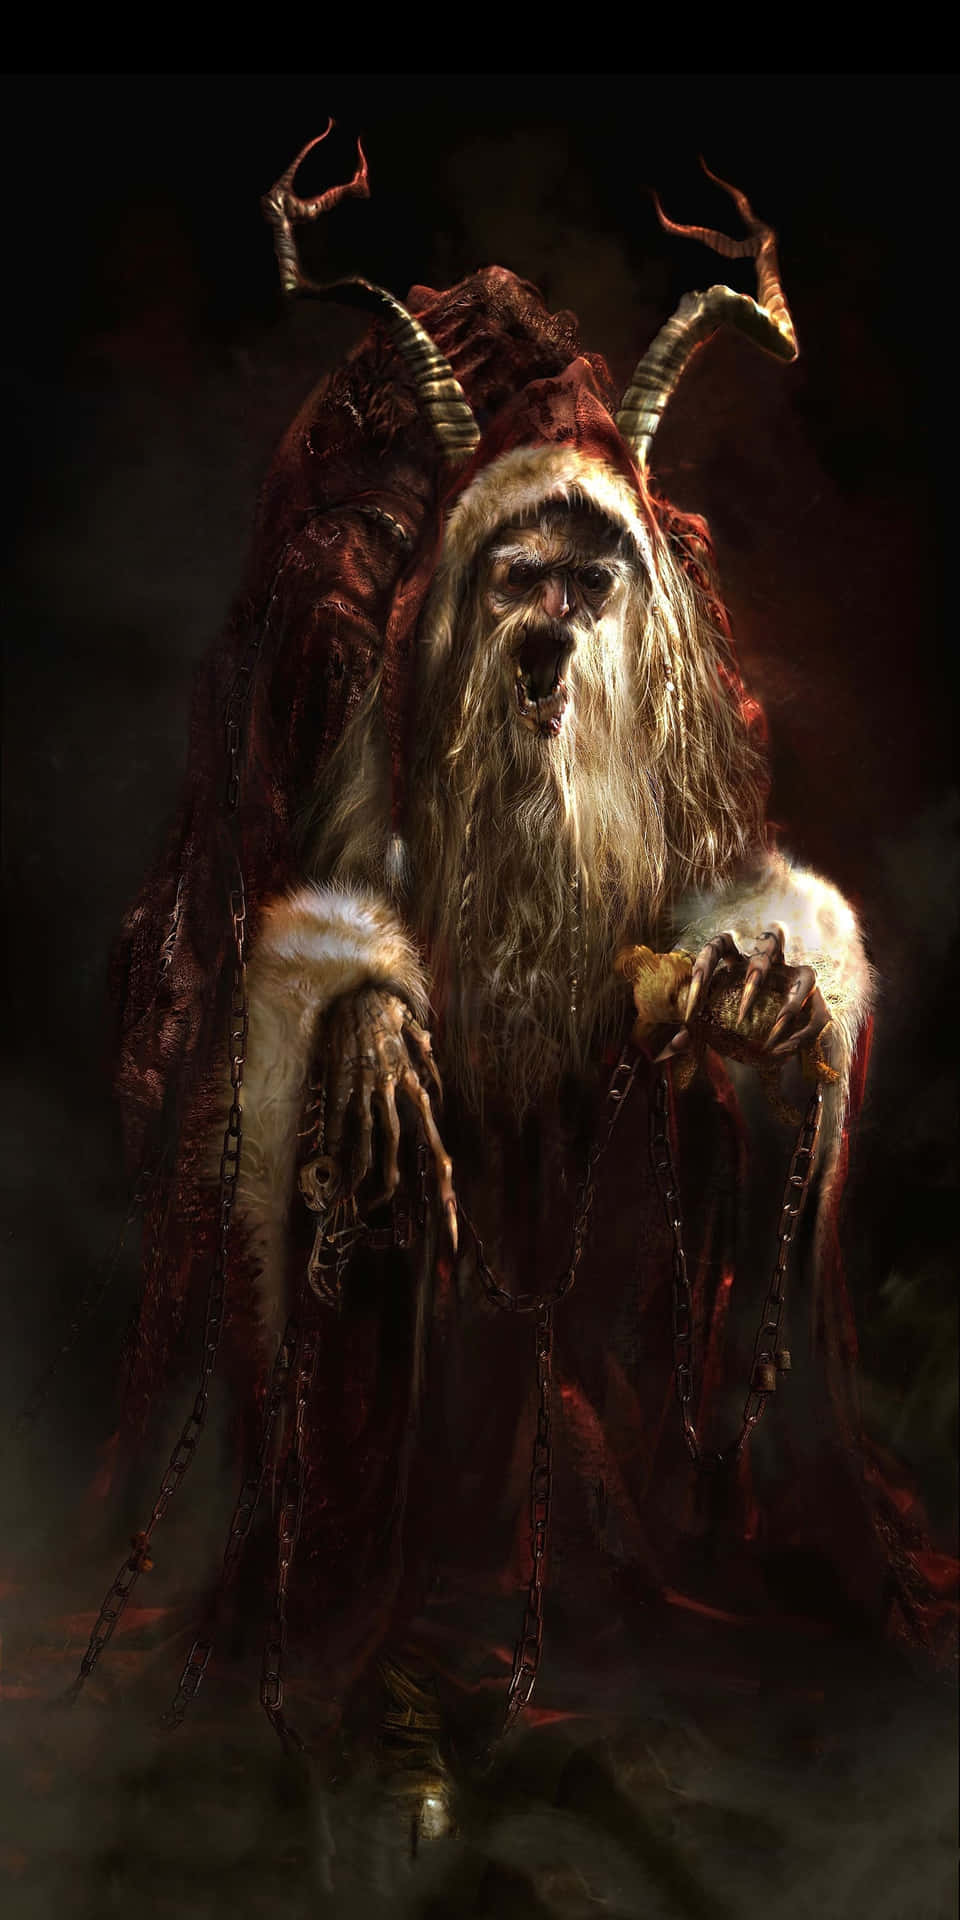 Krampus is a creature in alpine folklore who punishes naughty children during the Christmas season. Wallpaper